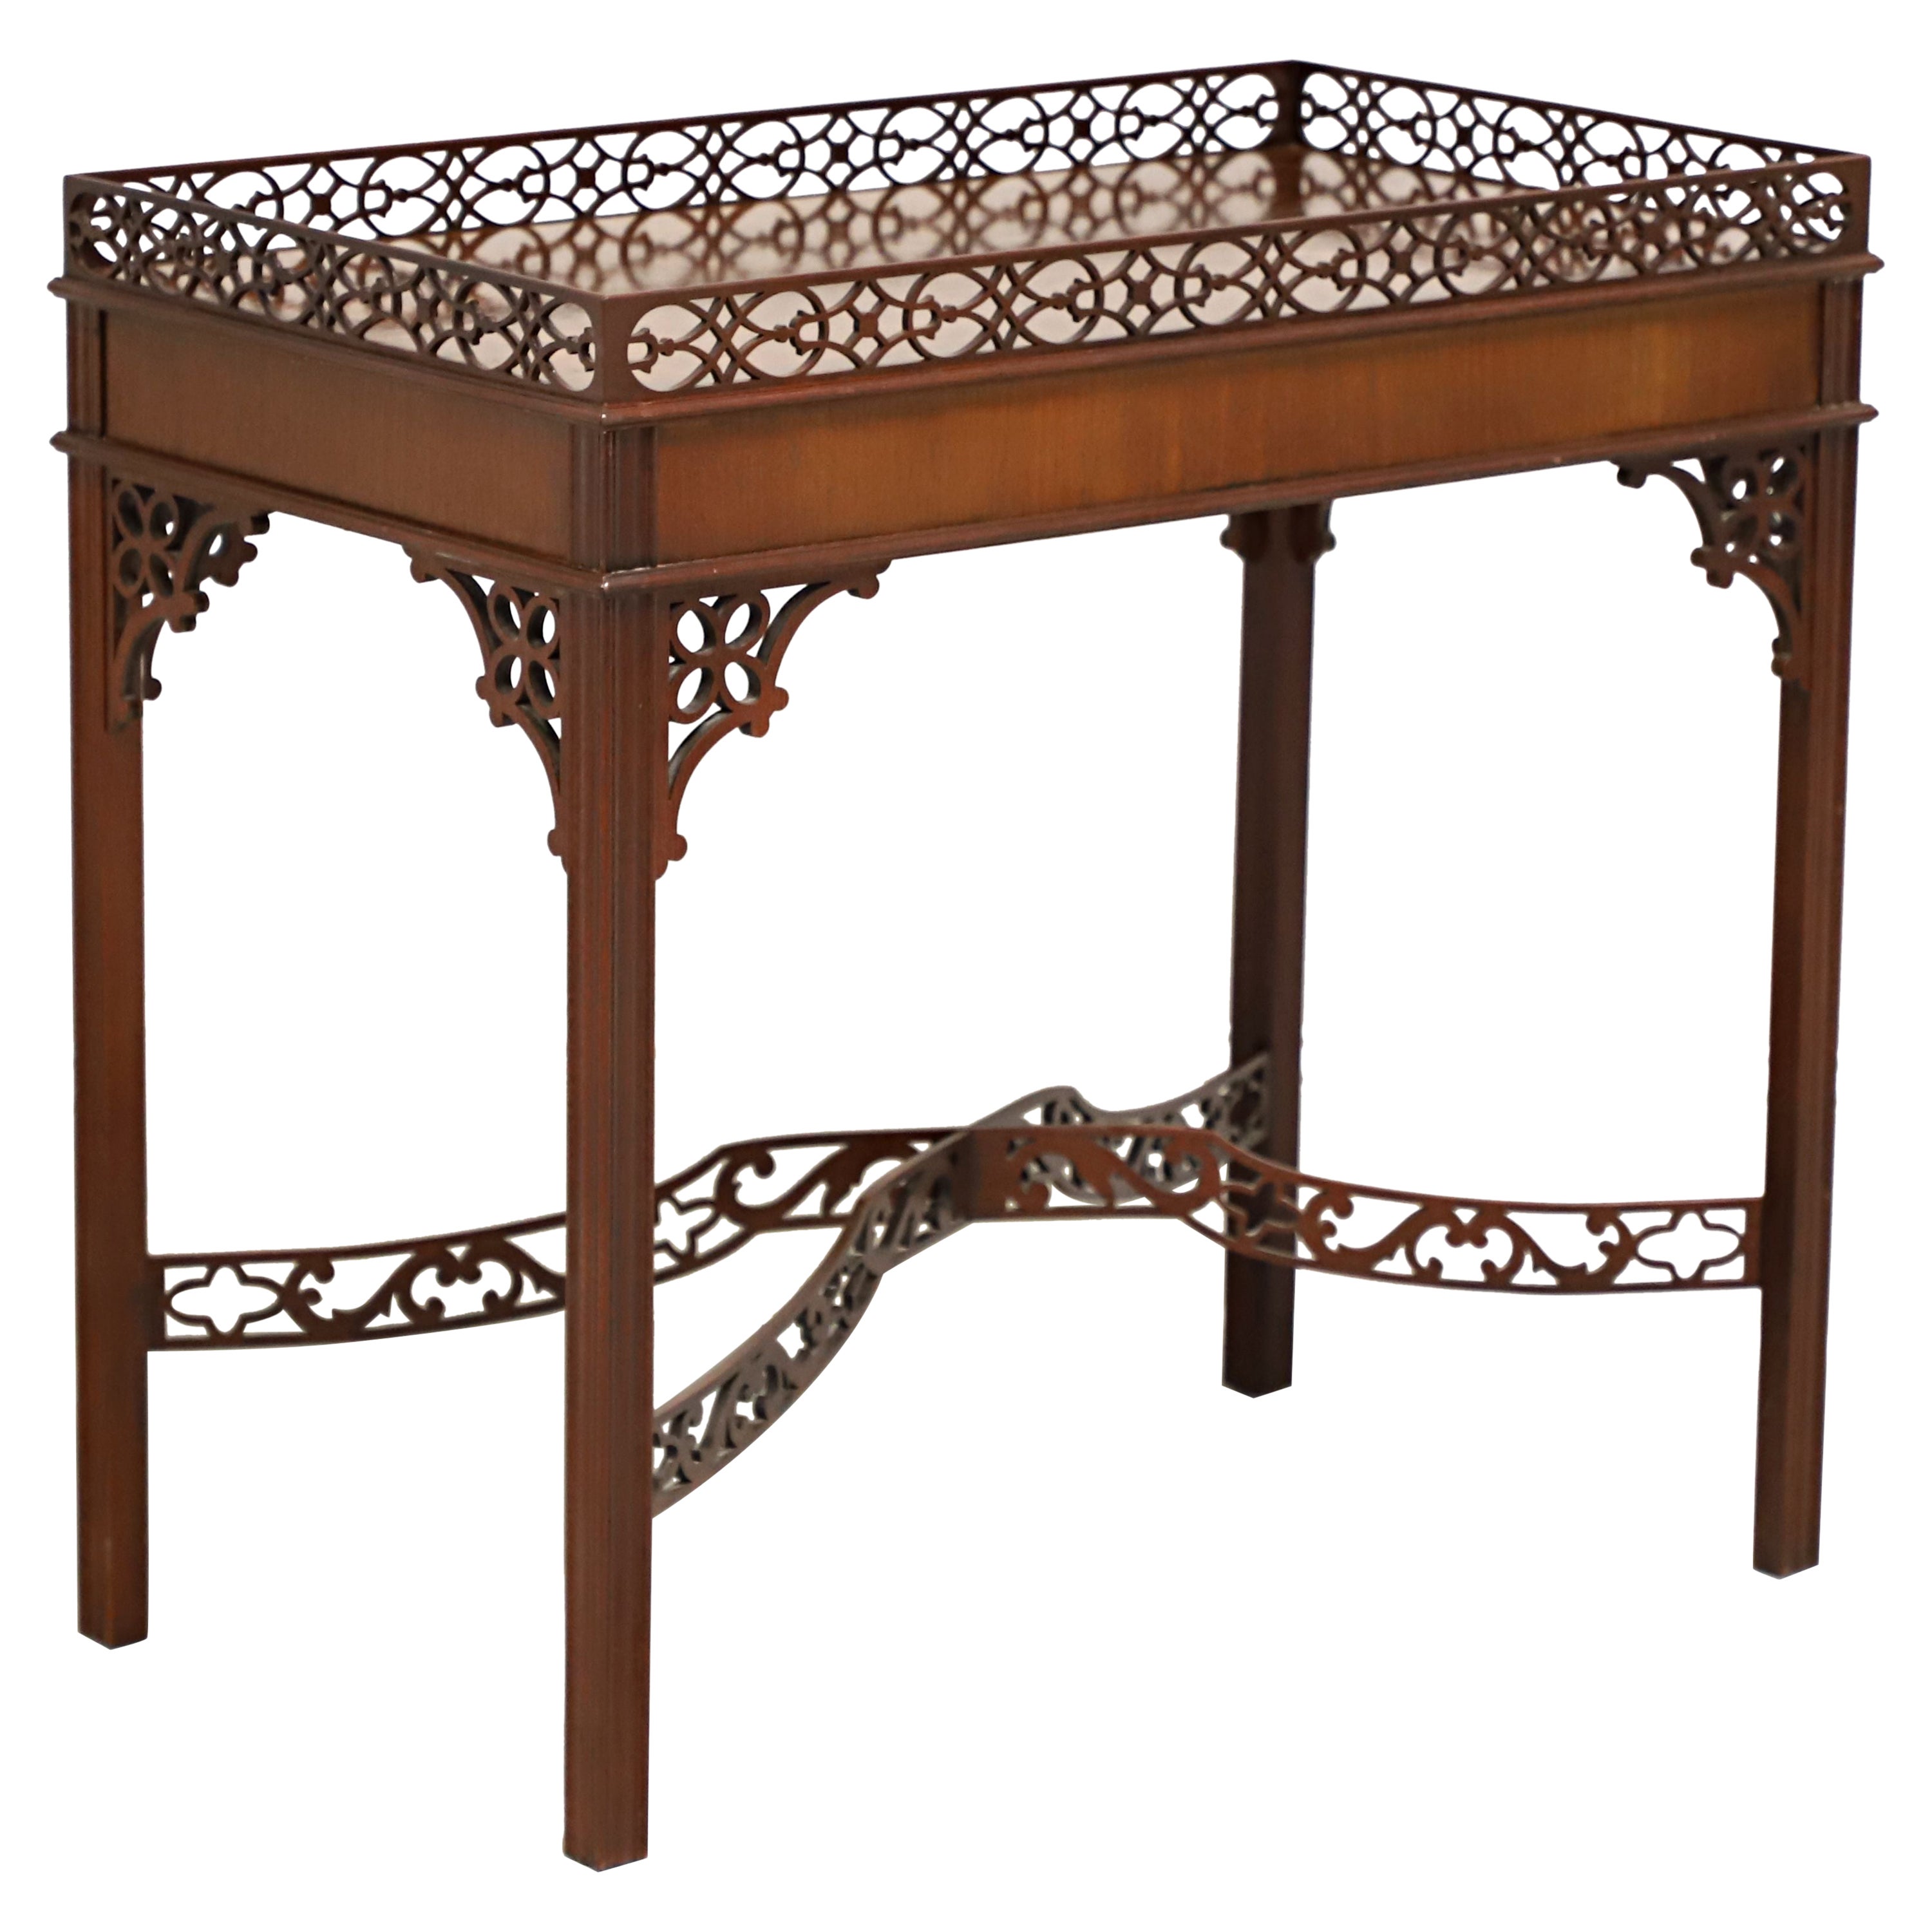 BAKER Mahogany Chippendale Style Fretwork Gallery Tea Table